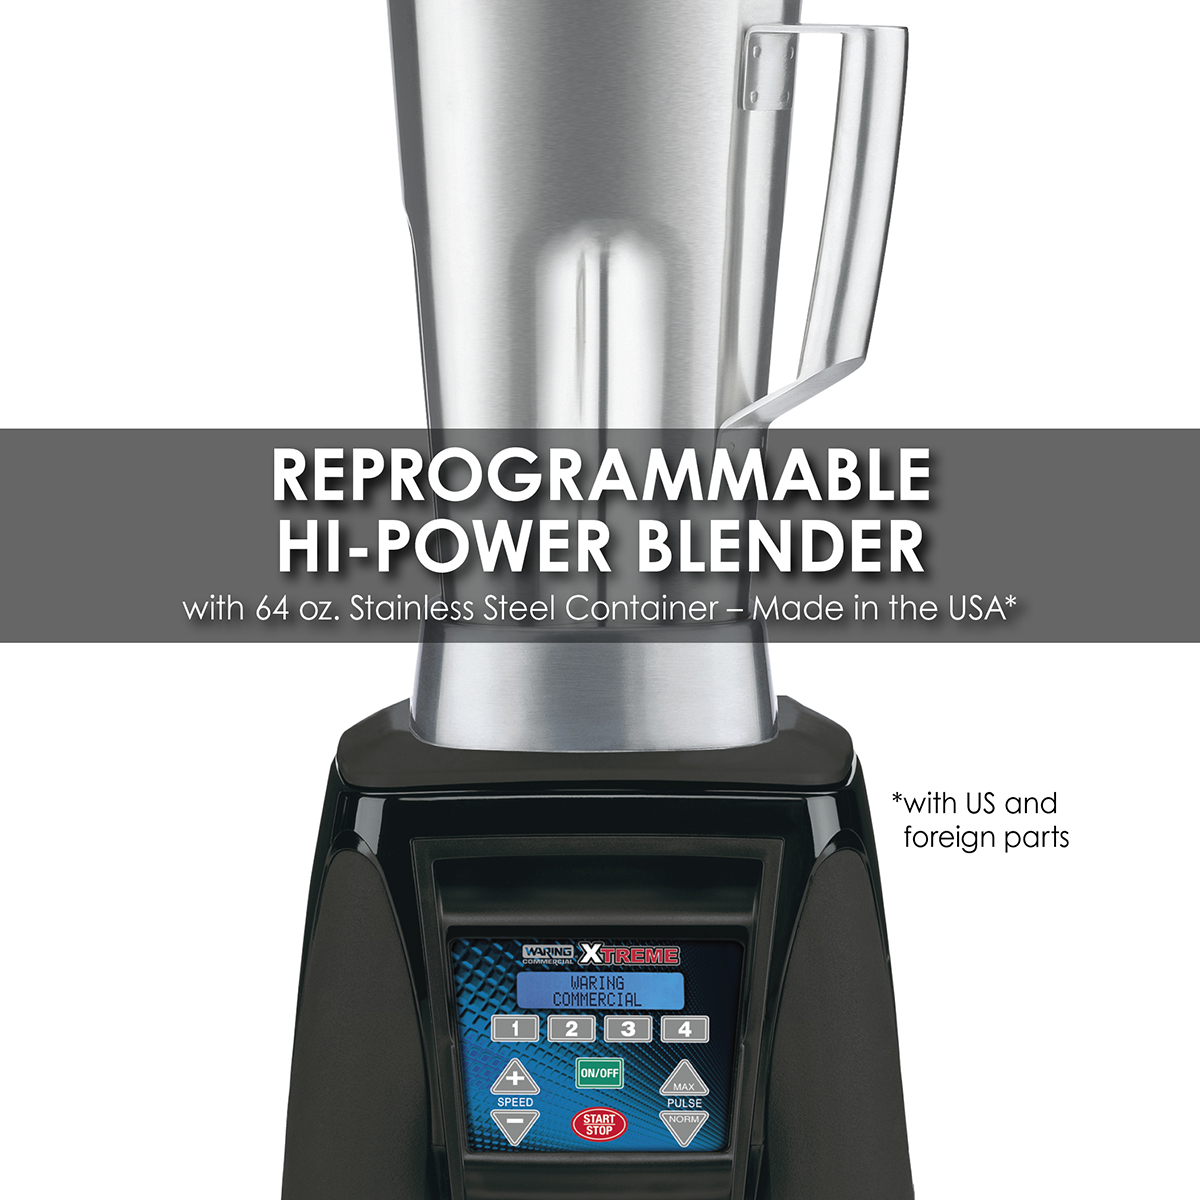 Waring Commercial Reprogrammable Hi-Power Blender with Sound Enclosure and  64 oz. Copolyester Container